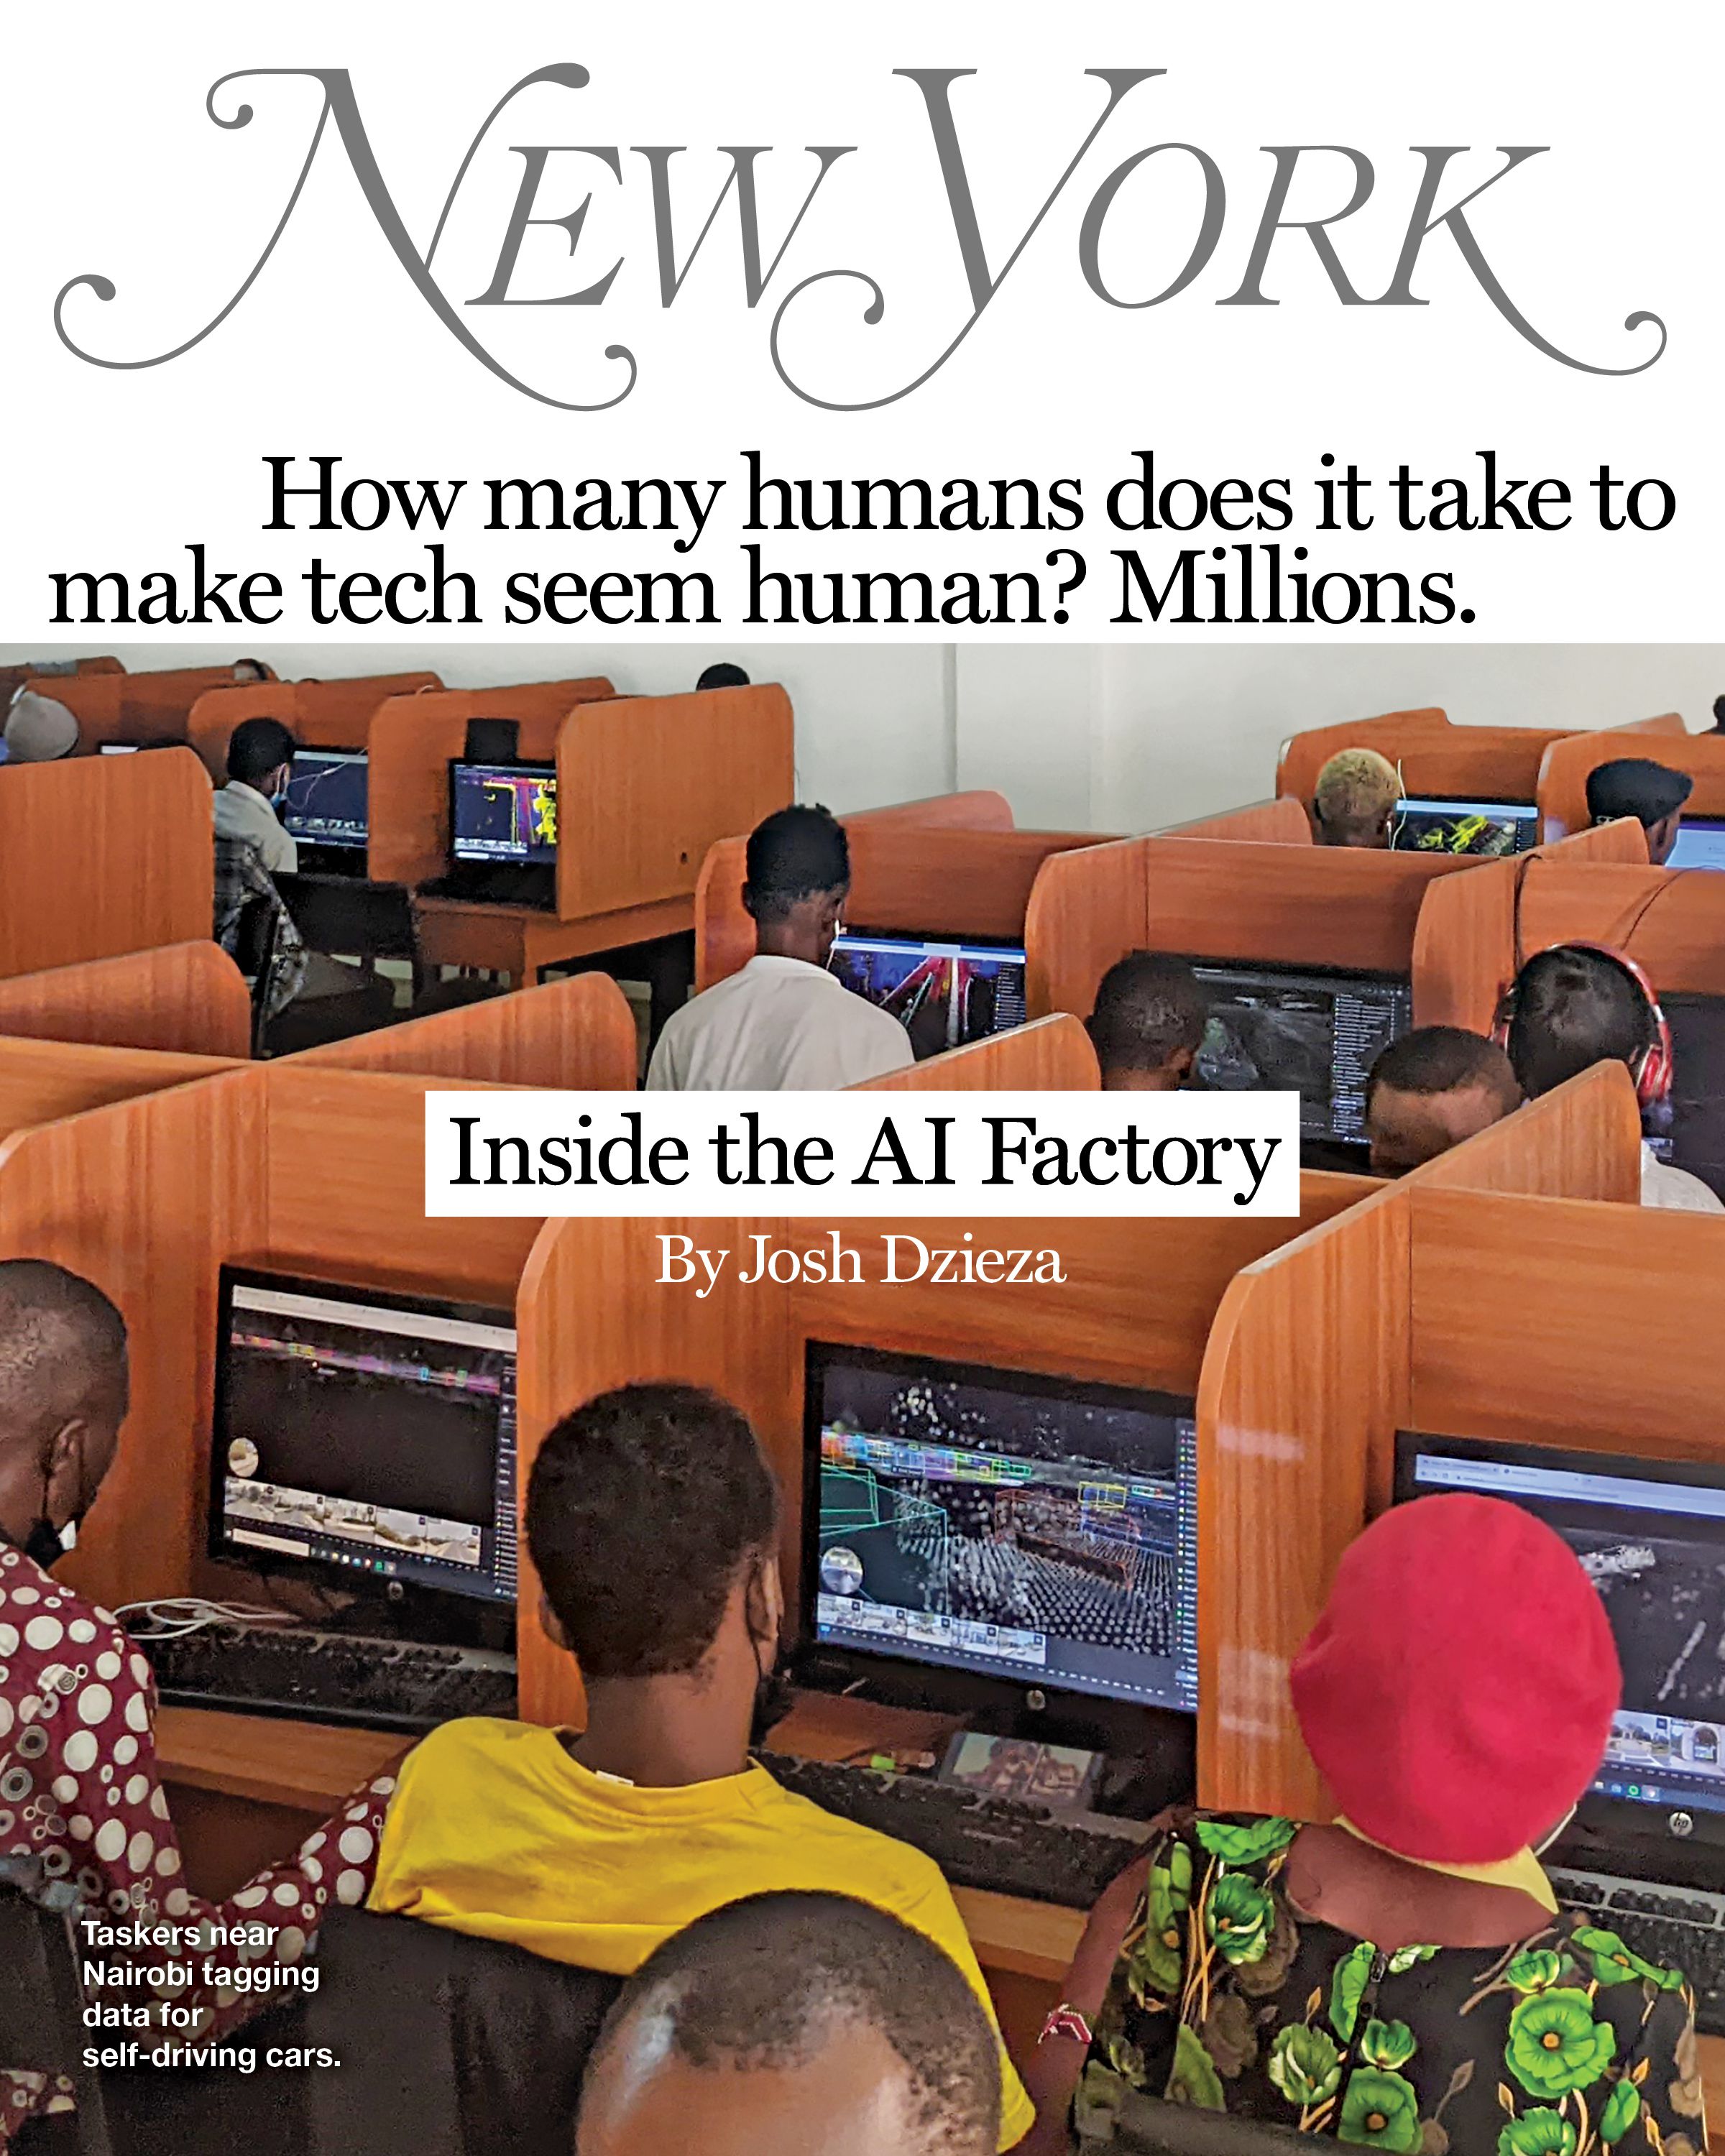 “Inside the AI Factory” on the cover of New York Magazine